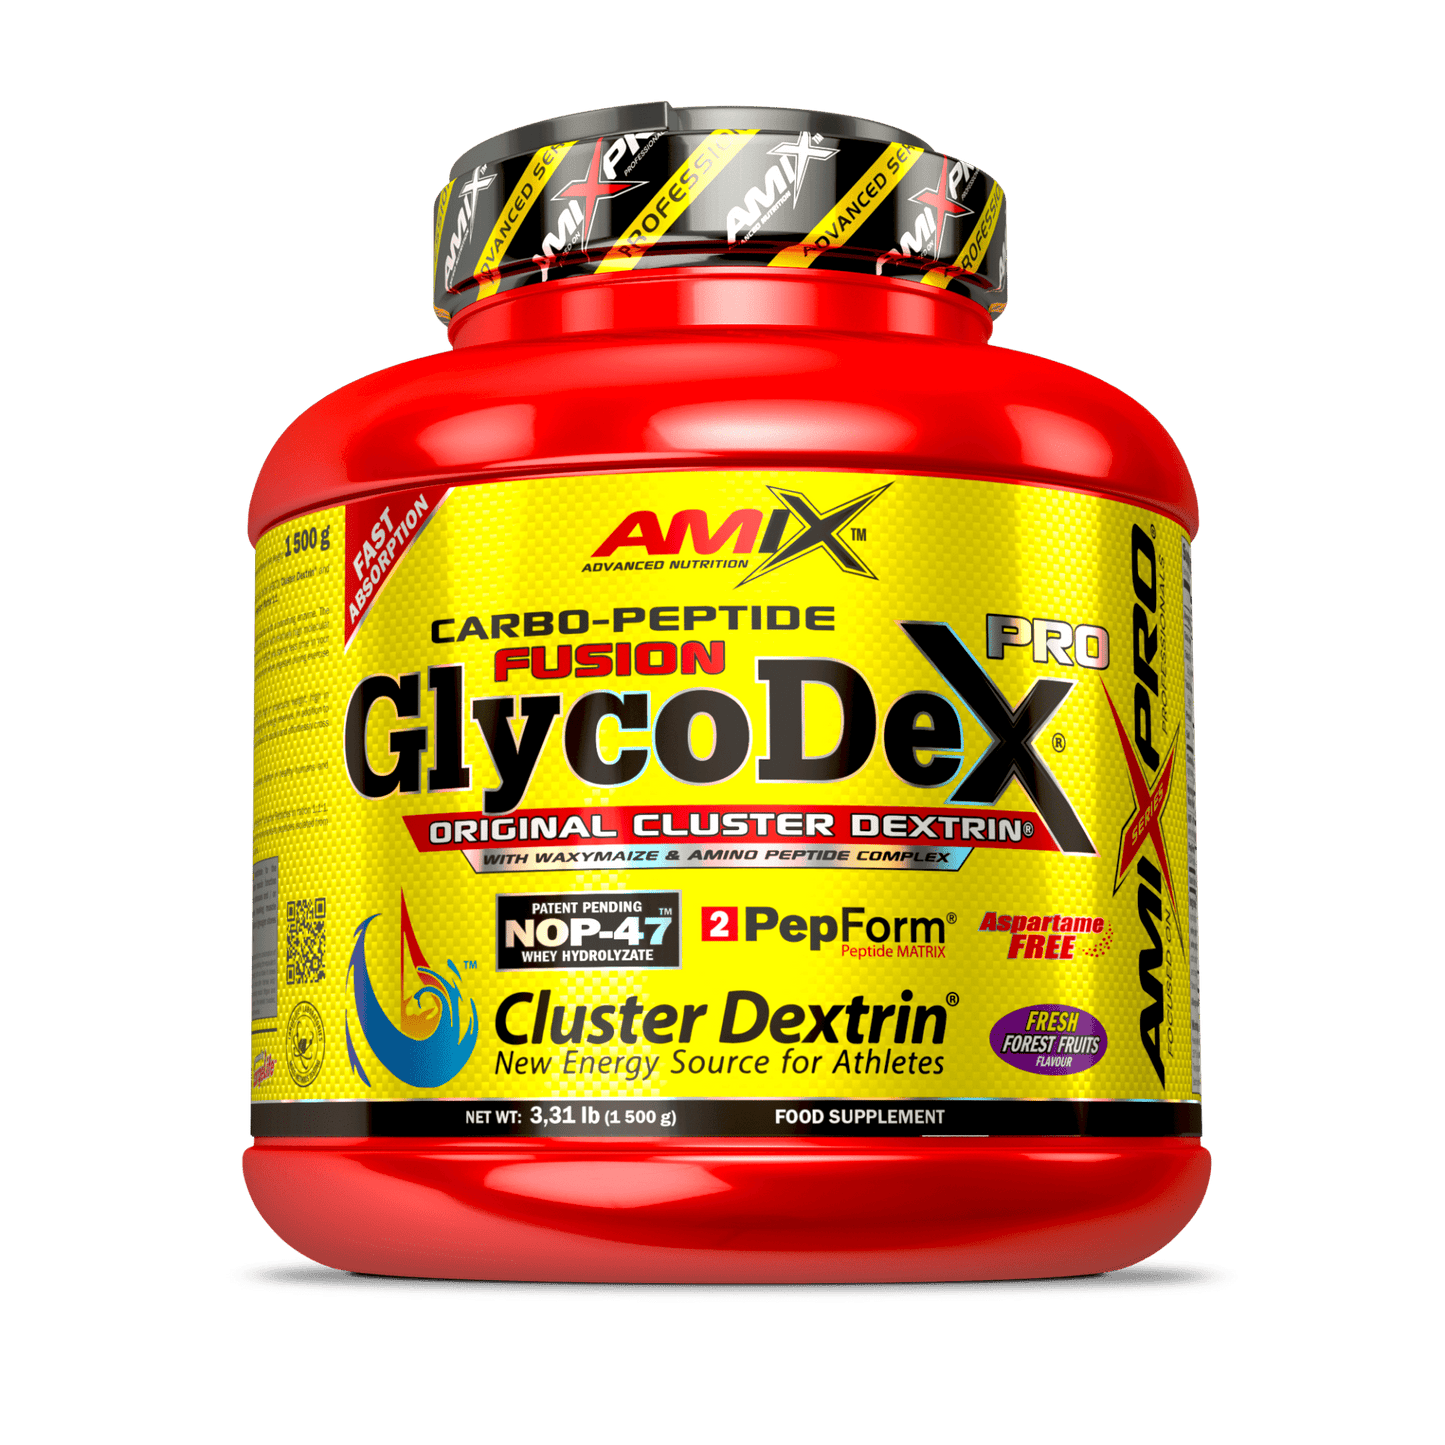 Glycodex carbo peptide amix cluster dextrin